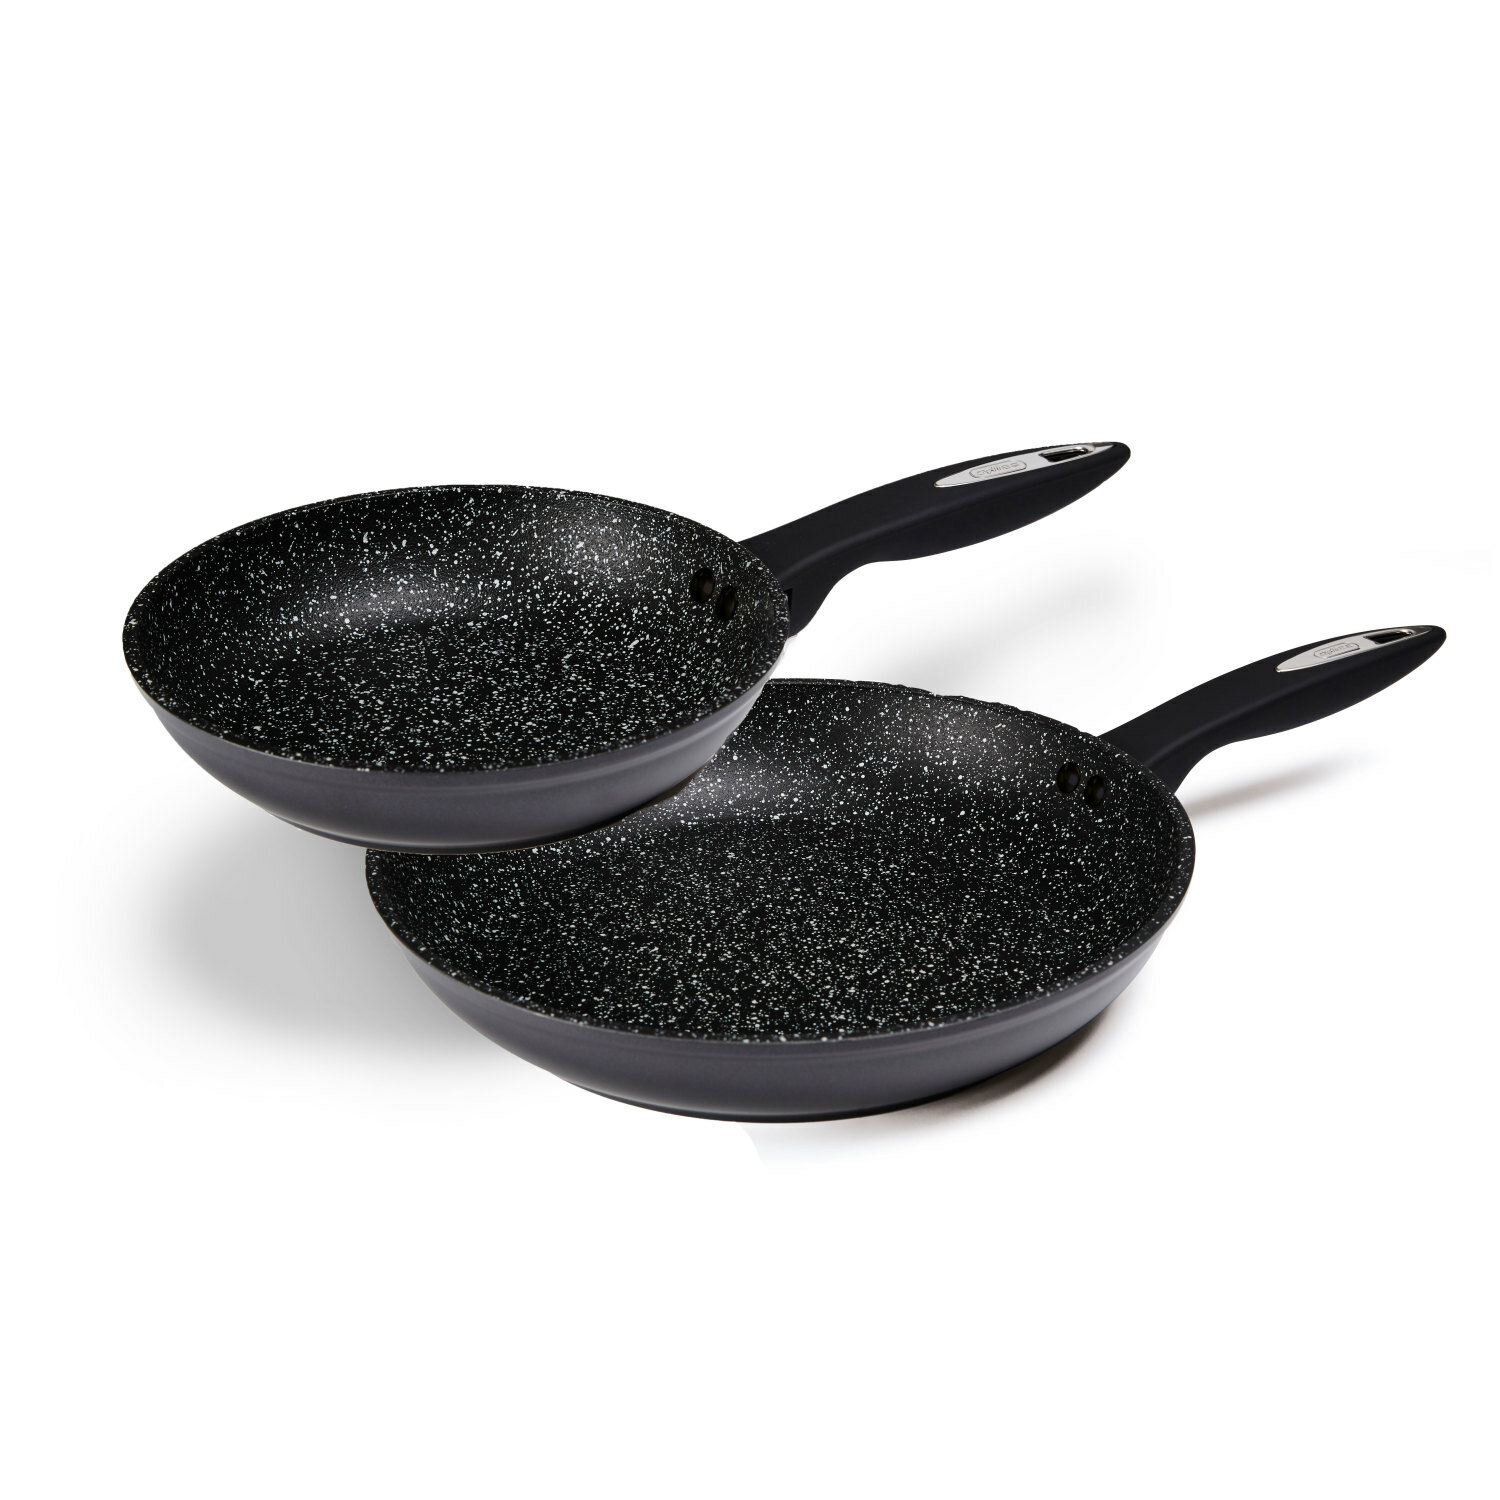  Cyrret Stone Frying Pan 8 inch, Nonstick Small Omelet